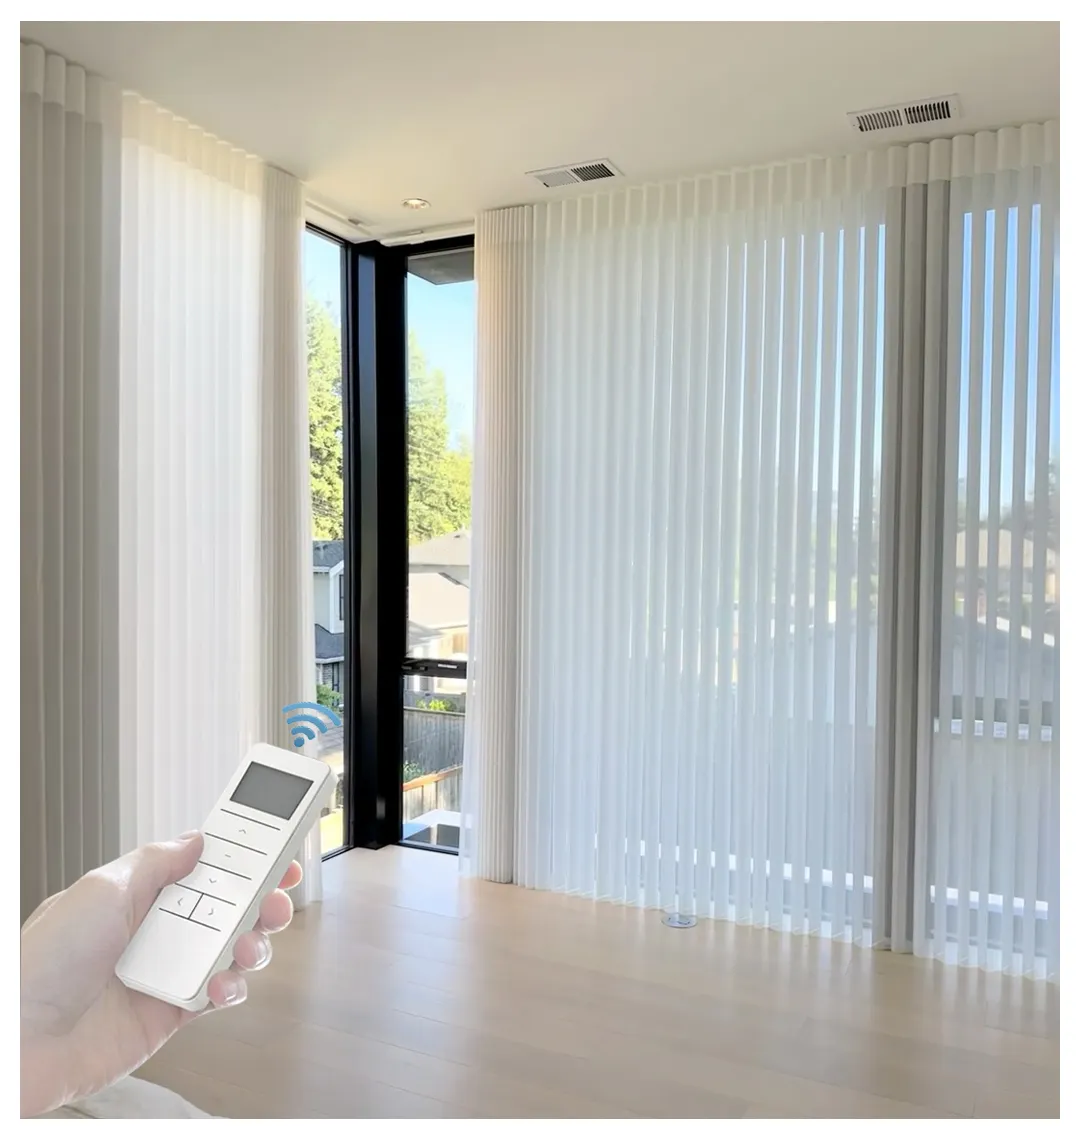 Motorized Smart Curtain Window Vertical Blinds Home Decor Venetian Blinds Fabric Hanas Curtains Dream Blinds for Indoor Use